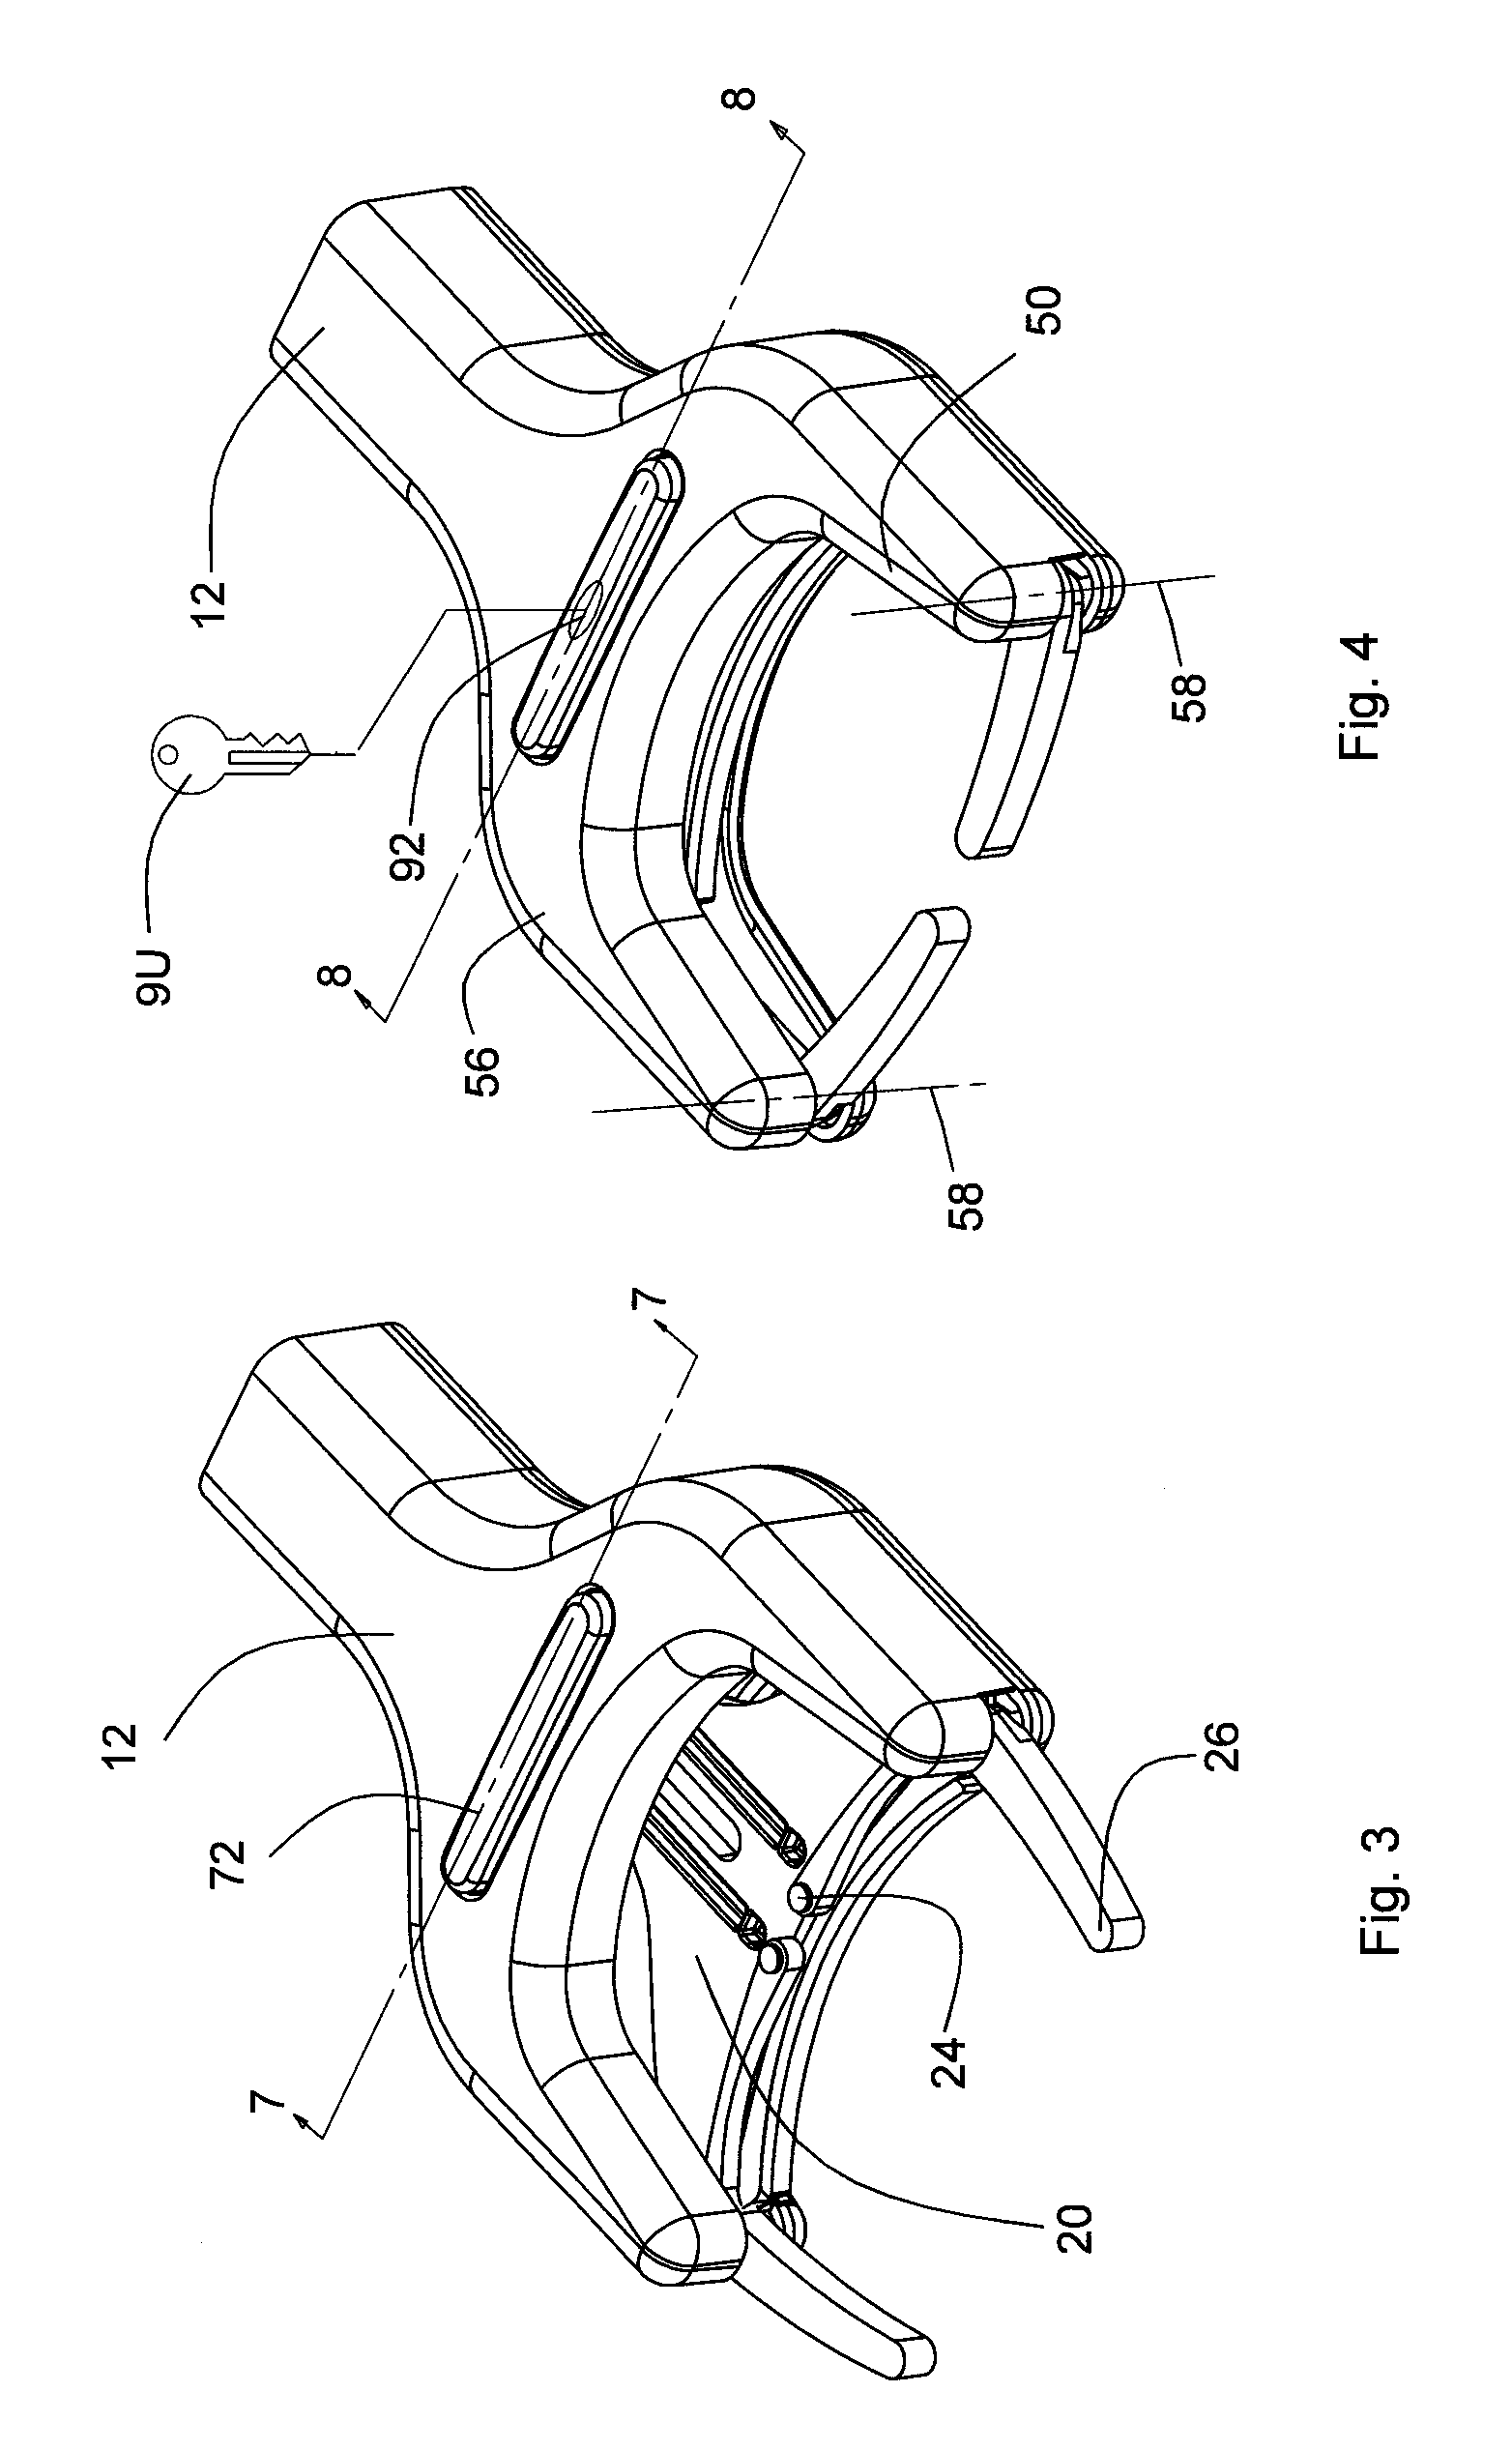 Instrument securing device